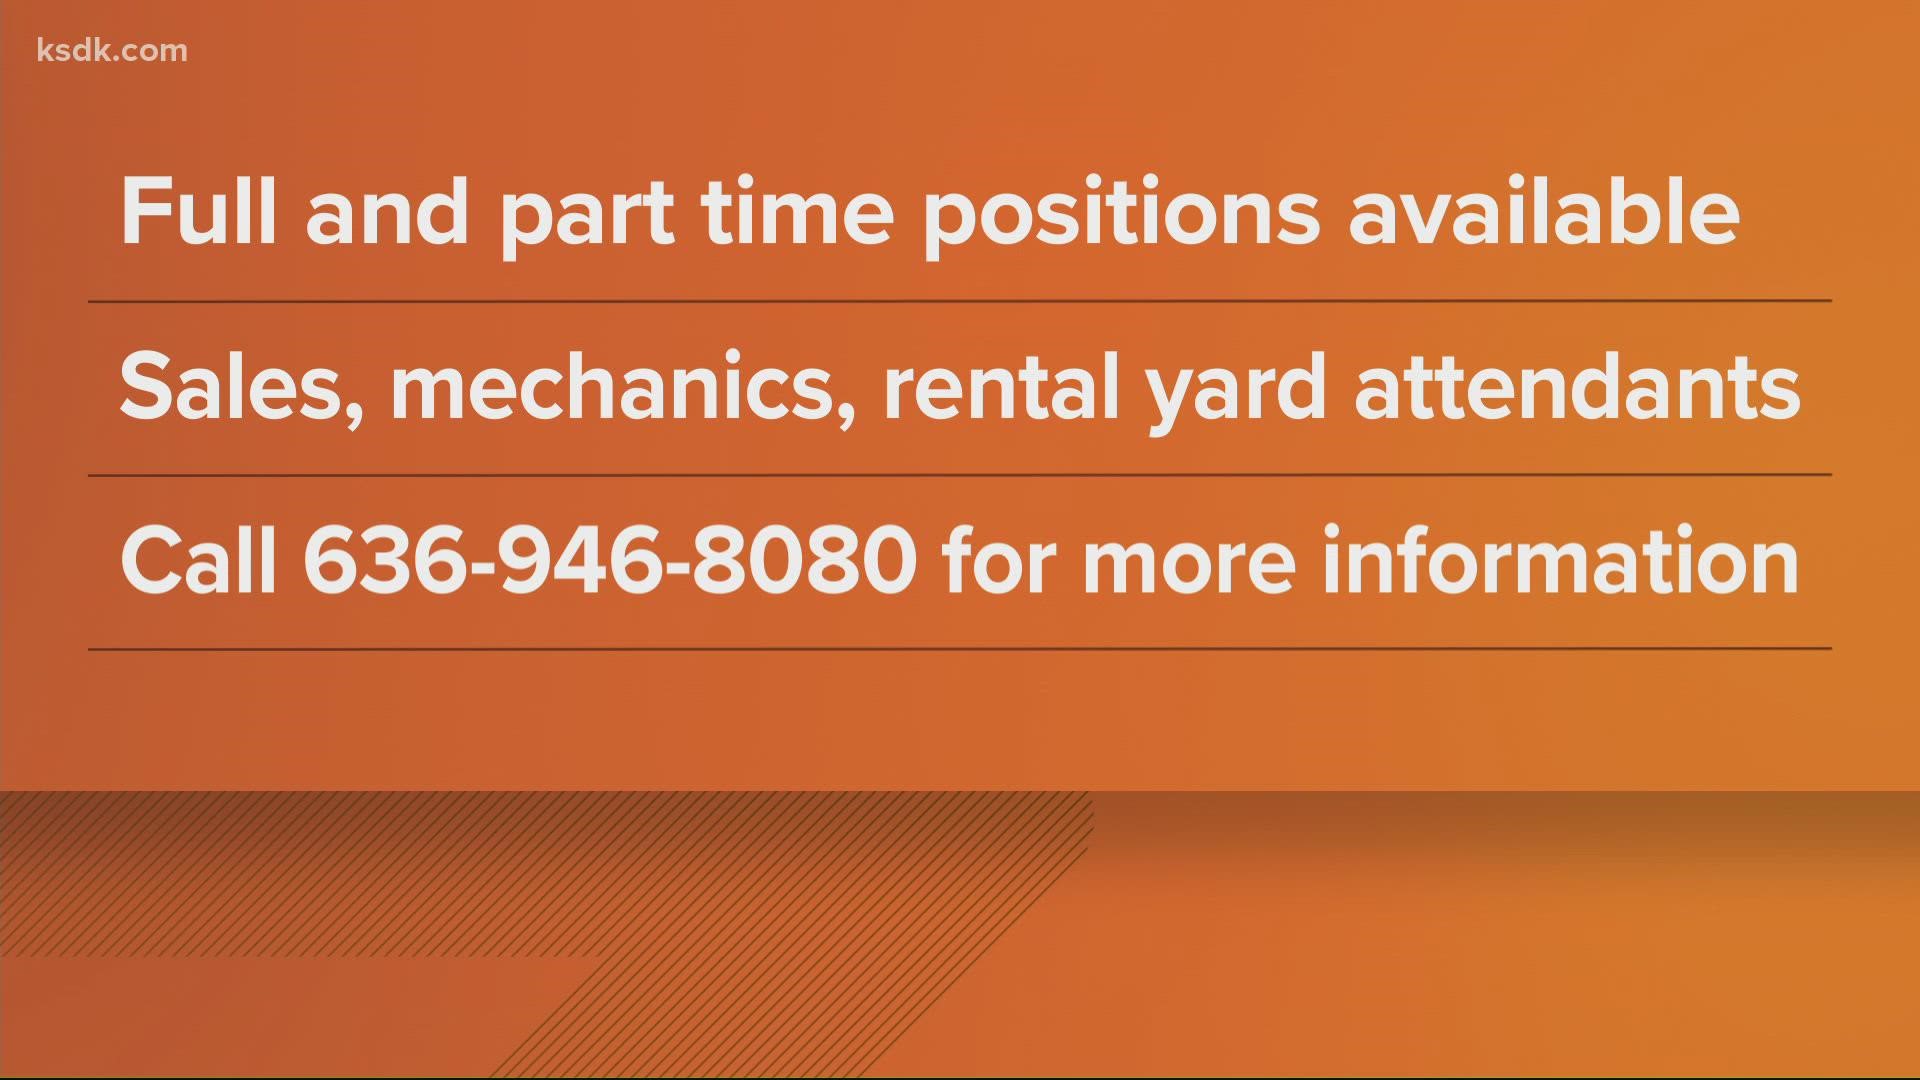 Equip Rental Sales has a variety of positions available. It’s looking for people to work in sales, mechanics and as rental yard attendants.